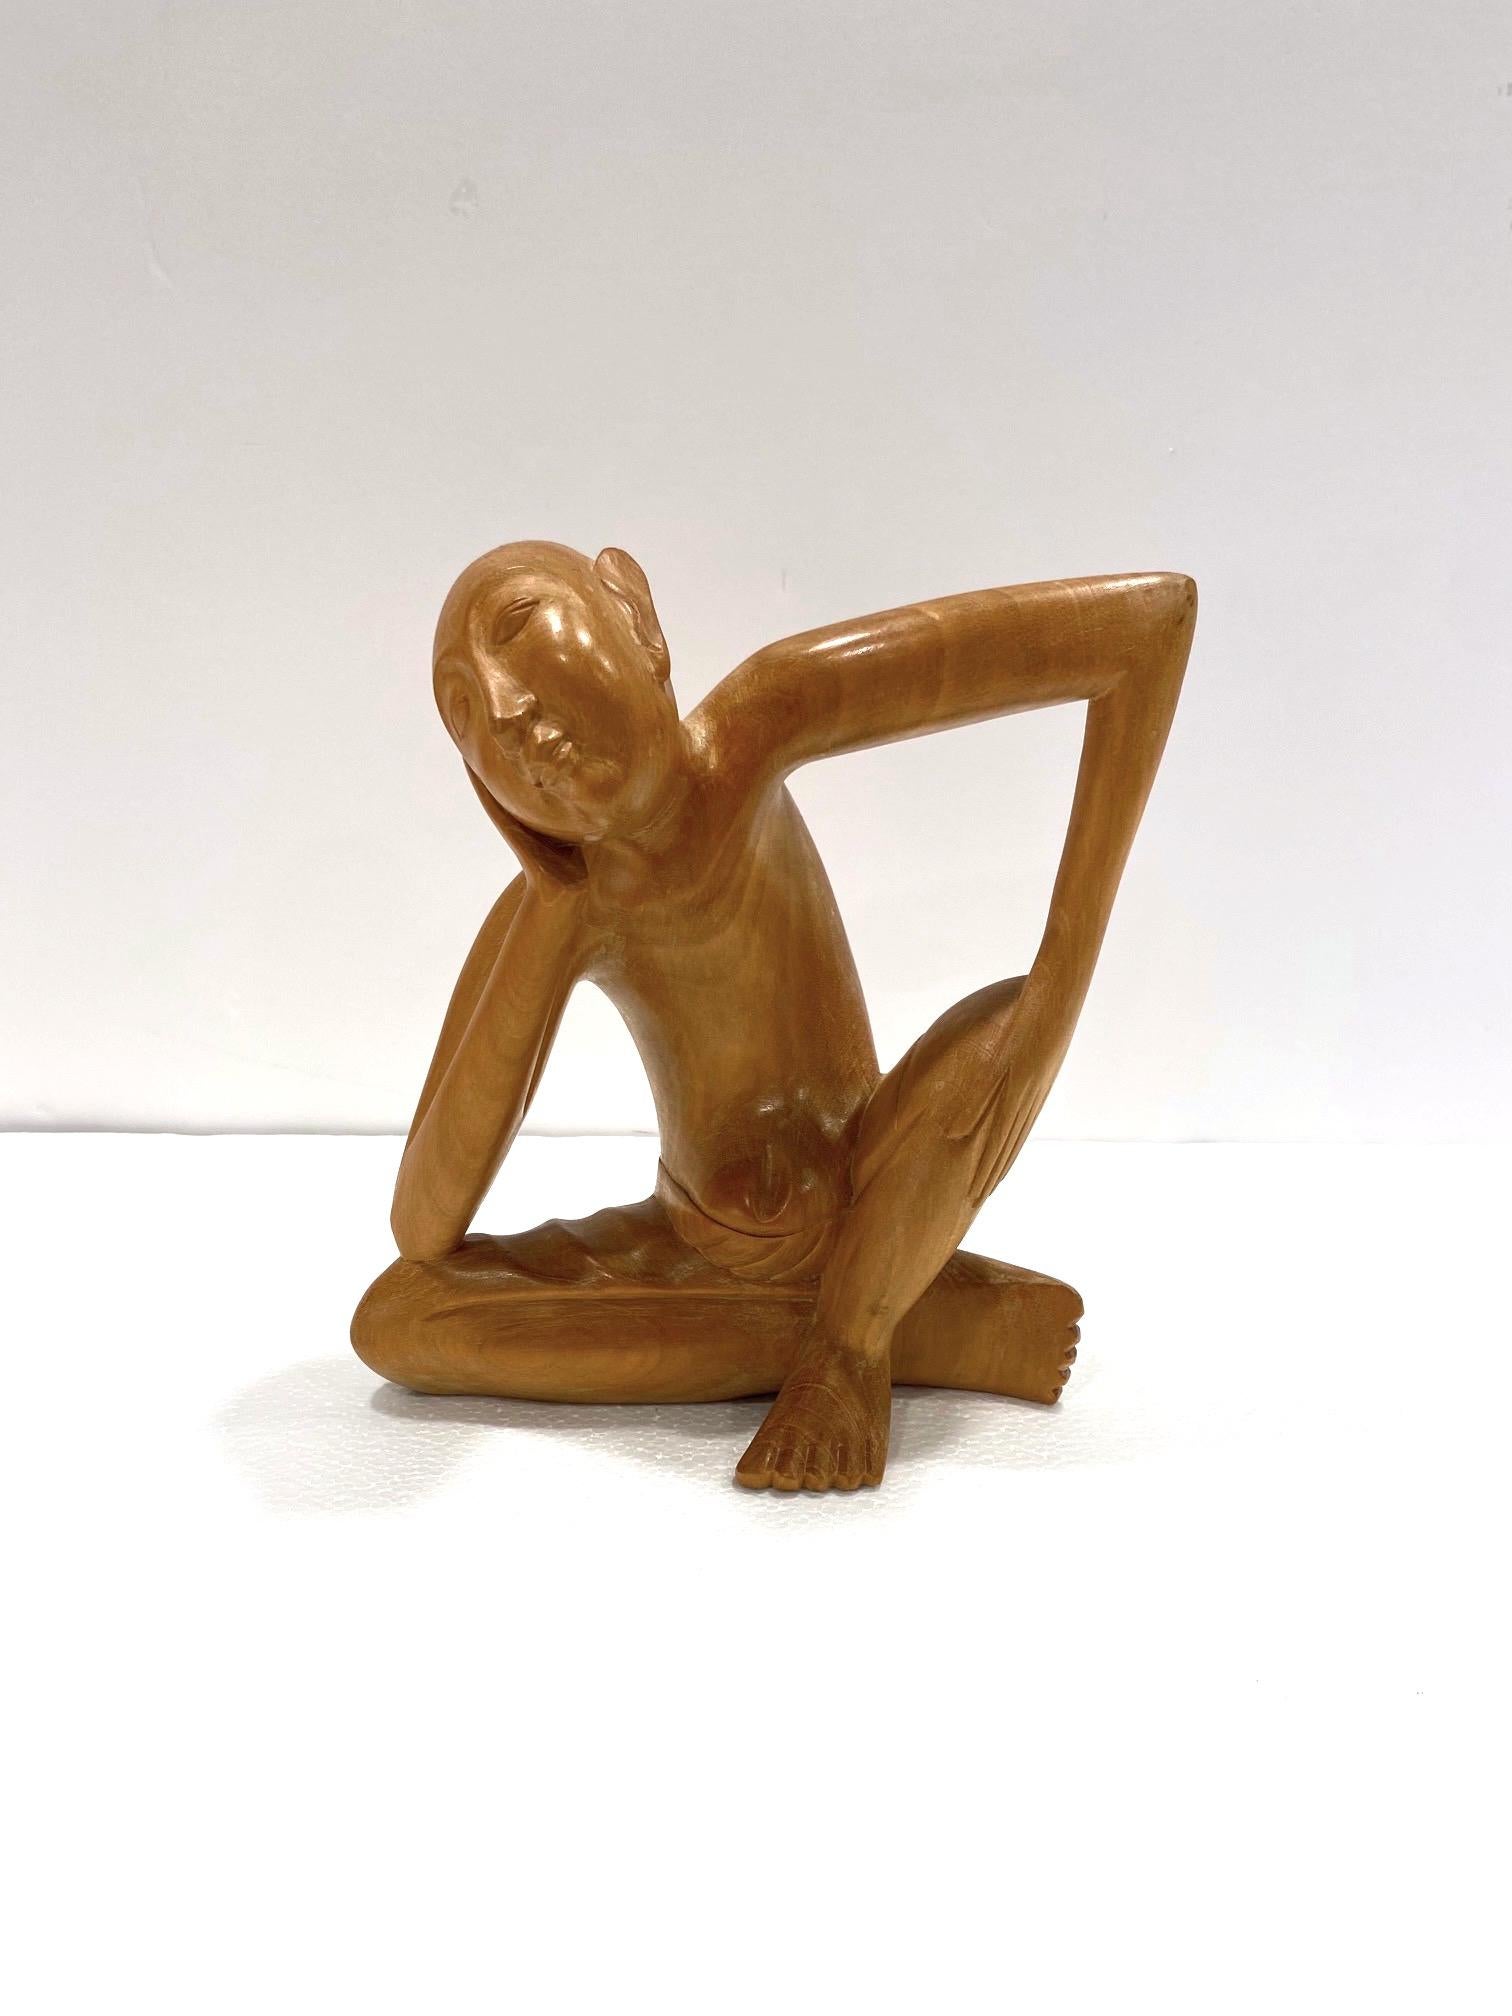 1970's Balinese figural sculpture in solid reclaimed suar wood. Artisan made with exquisite hand carved details. This sculpture features a sitting man in a pensive or contemplative state, perhaps a daydreamer. The striking posture creates a linear